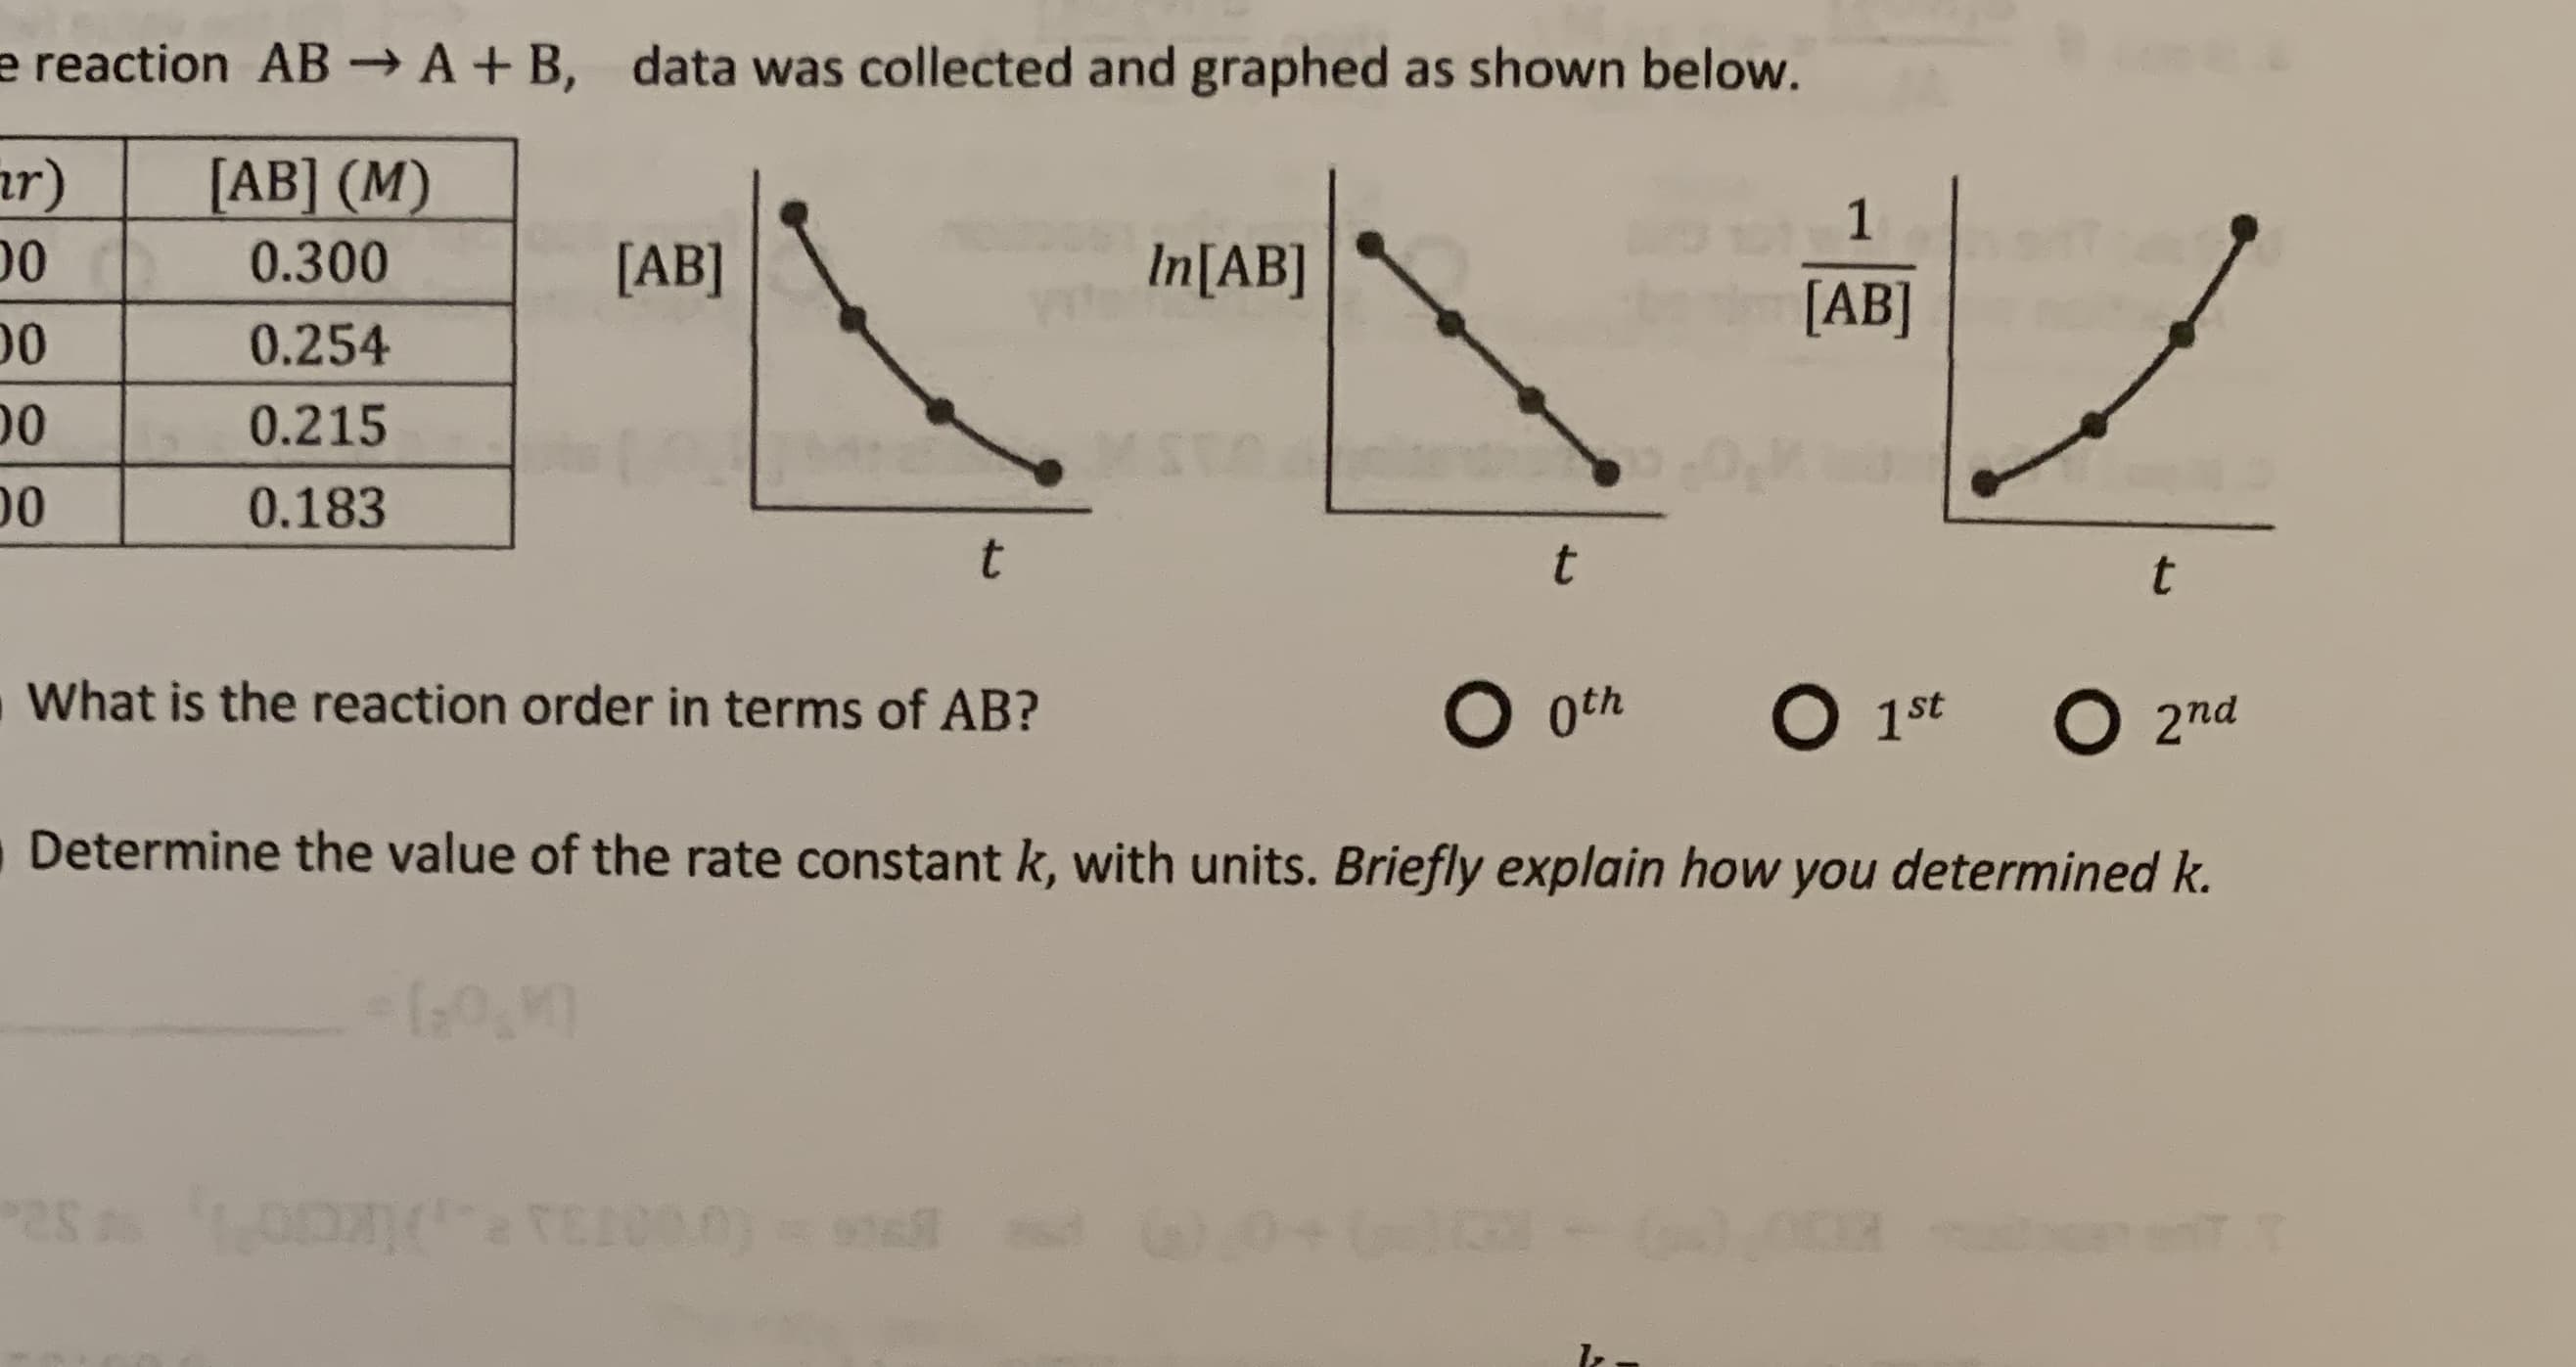 e reaction AB→ A + B, data was collected and graphed as shown below.
ar)
00
[AB] (M)
1
0.300
[AB]
In[AB]
[AB]
00
0.254
00
0.215
00
0.183
What is the reaction order in terms of AB?
O oth
O 1st
O 2nd
Determine the value of the rate constant k, with units. Briefly explain how you determined k.
100.0
